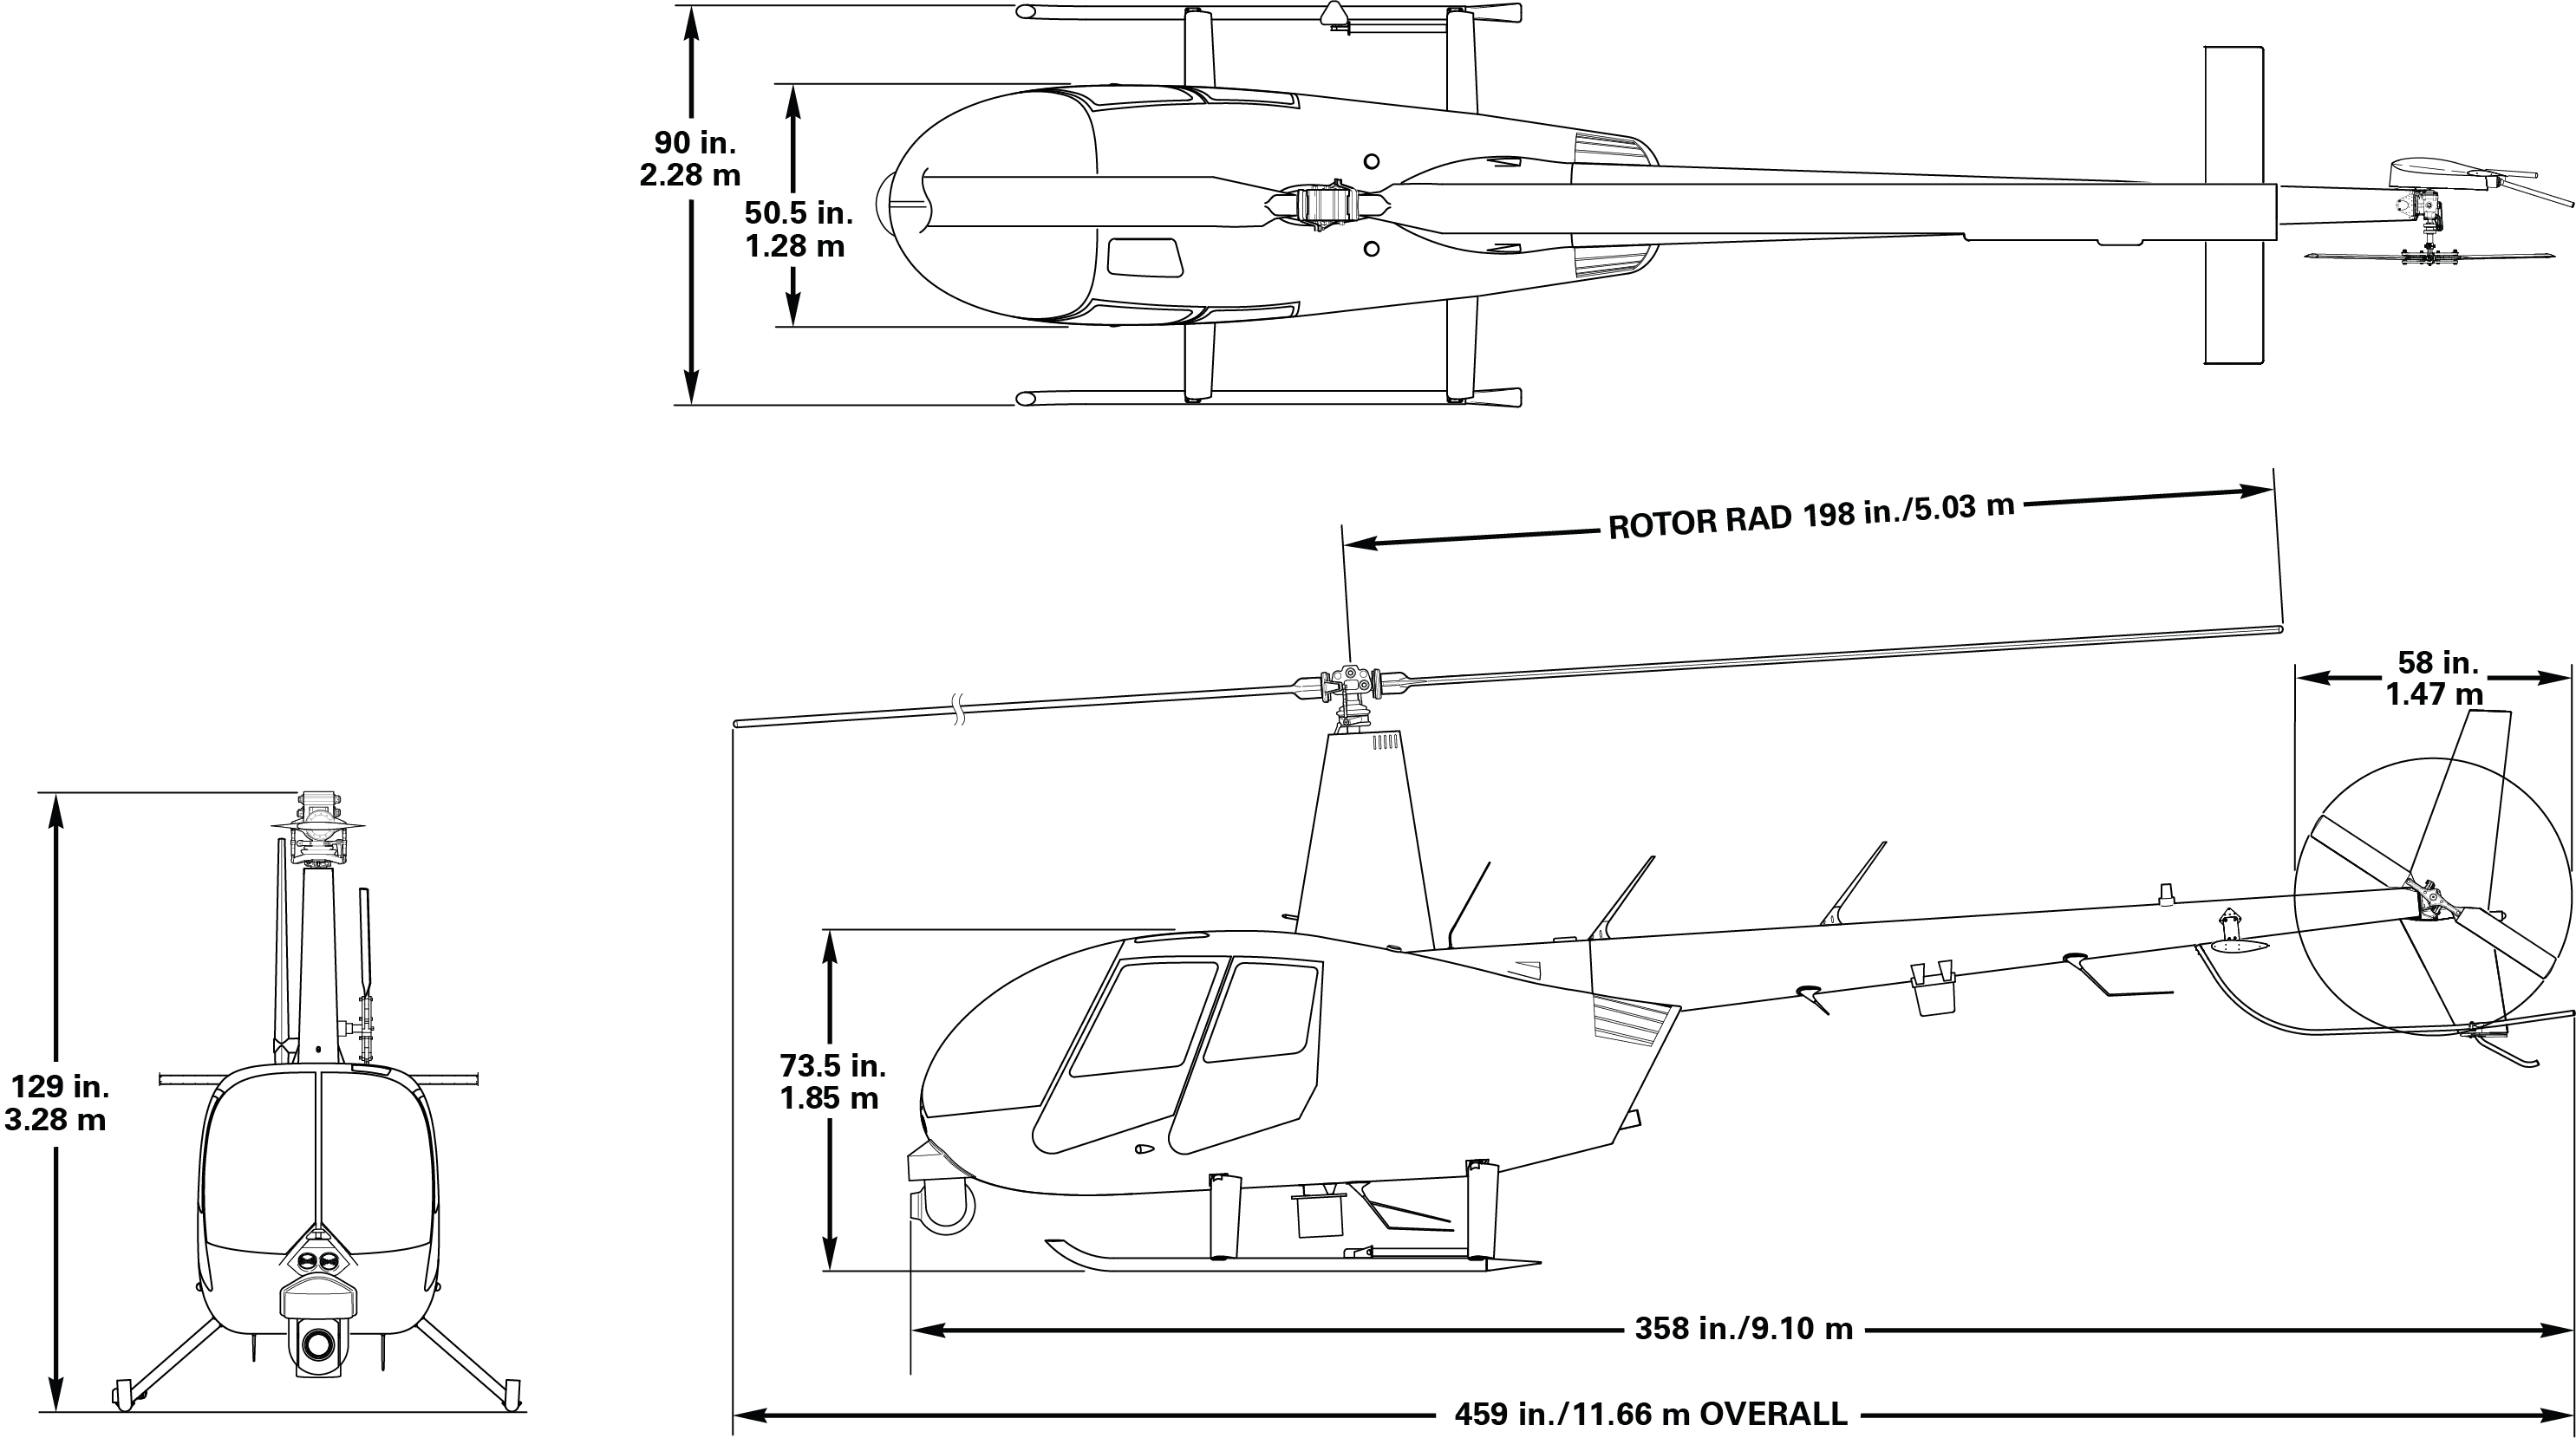 R44 Newscopter Dimensions Diagram